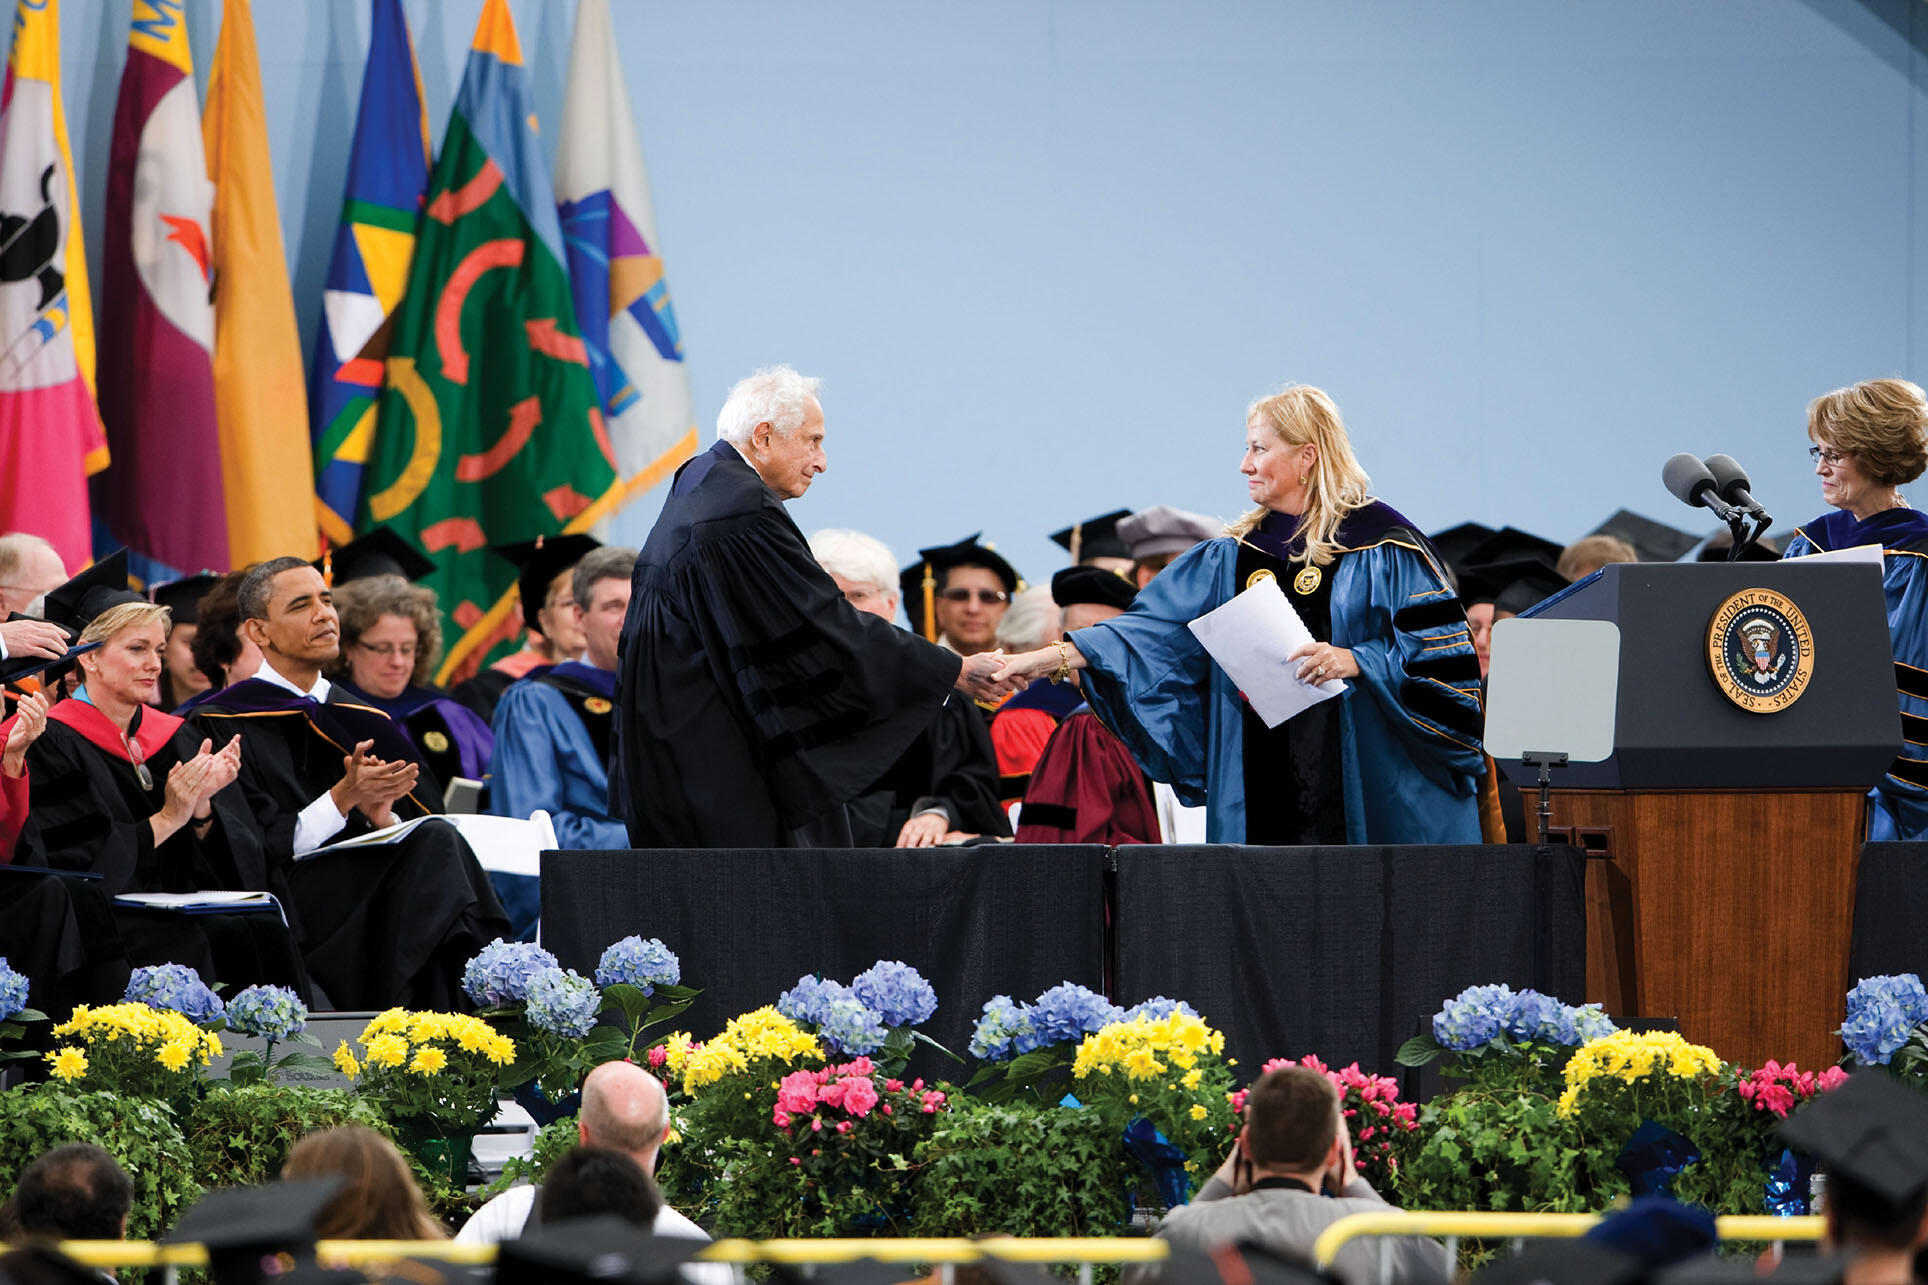 Stan Ovshinsky receives an honorary Doctor of Science degree from the University of Michigan,  Ann  Arbor, in 2010. At left, Michigan Governor Jennifer Granholm and President Barack Obama applaud. (Photo by Scott C. Soderberg/Michigan Photography.)